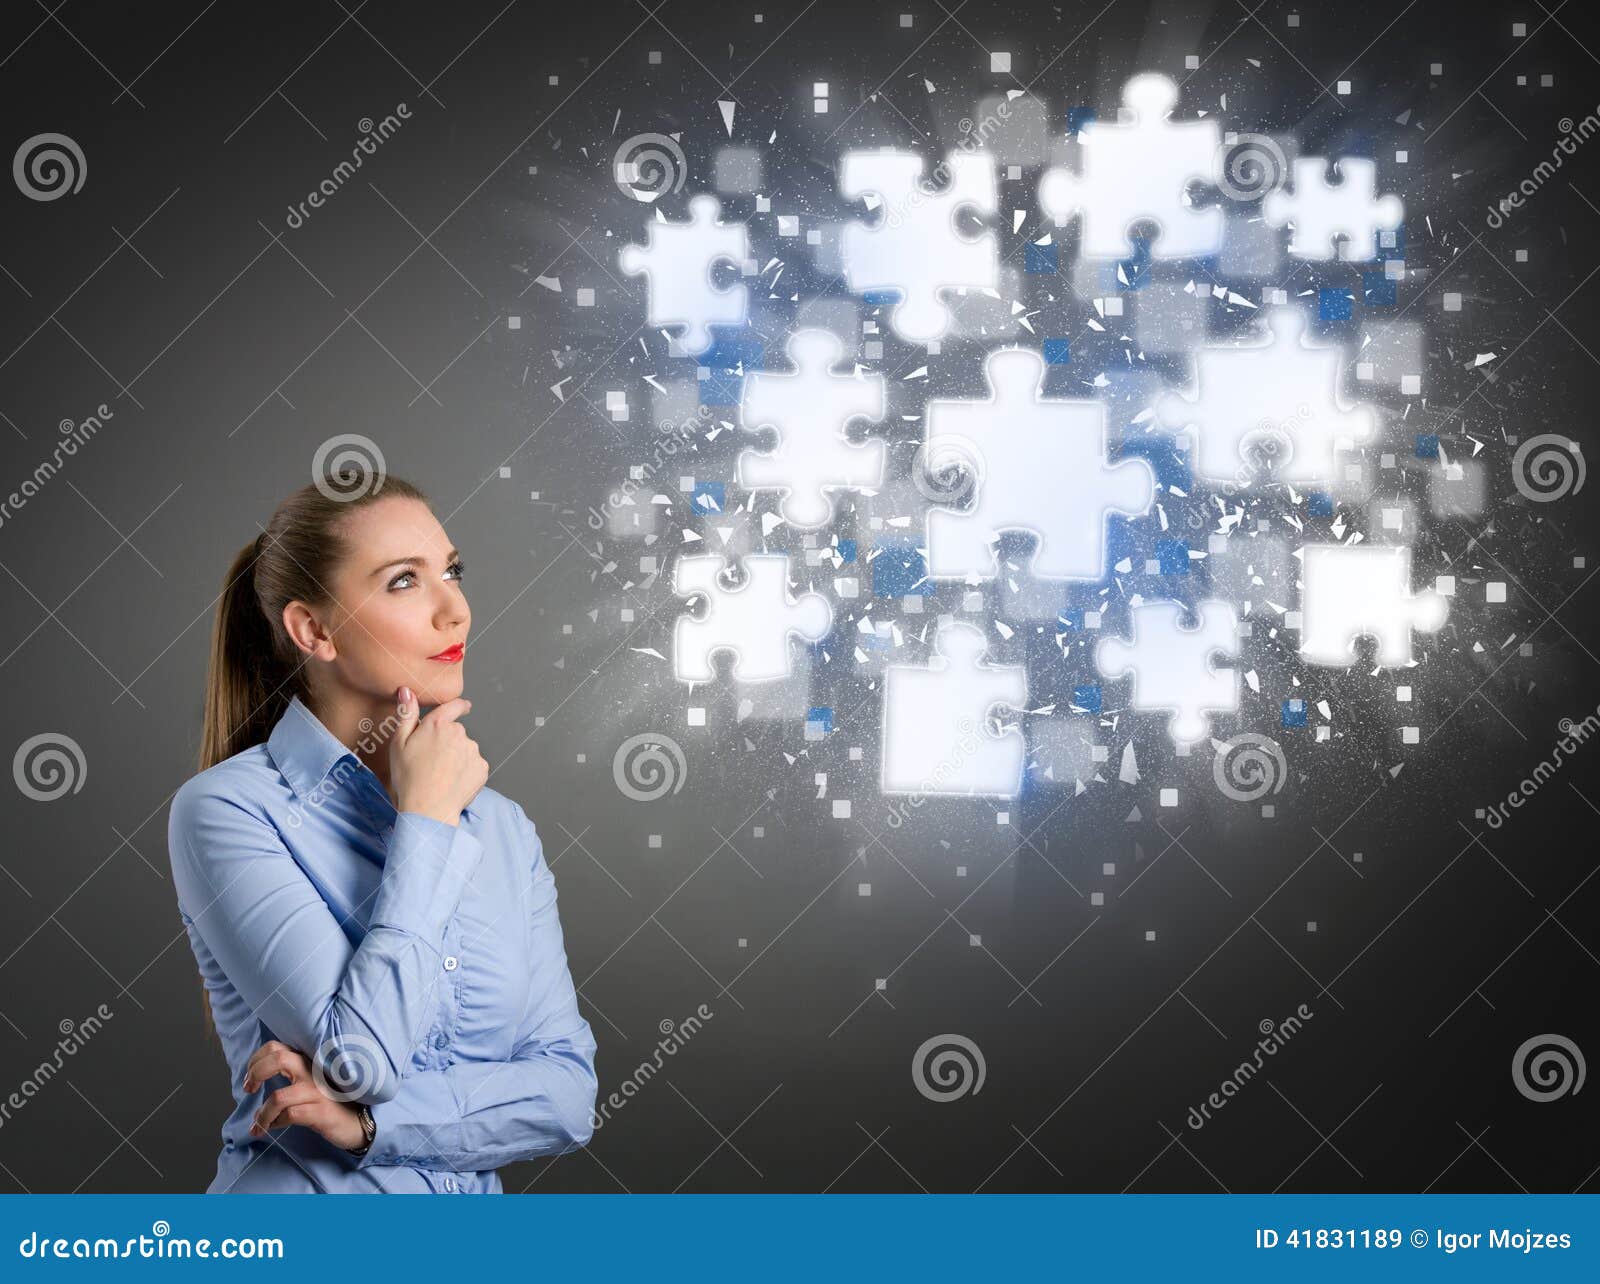 thinking businesswoman looking at shining puzzle pieces